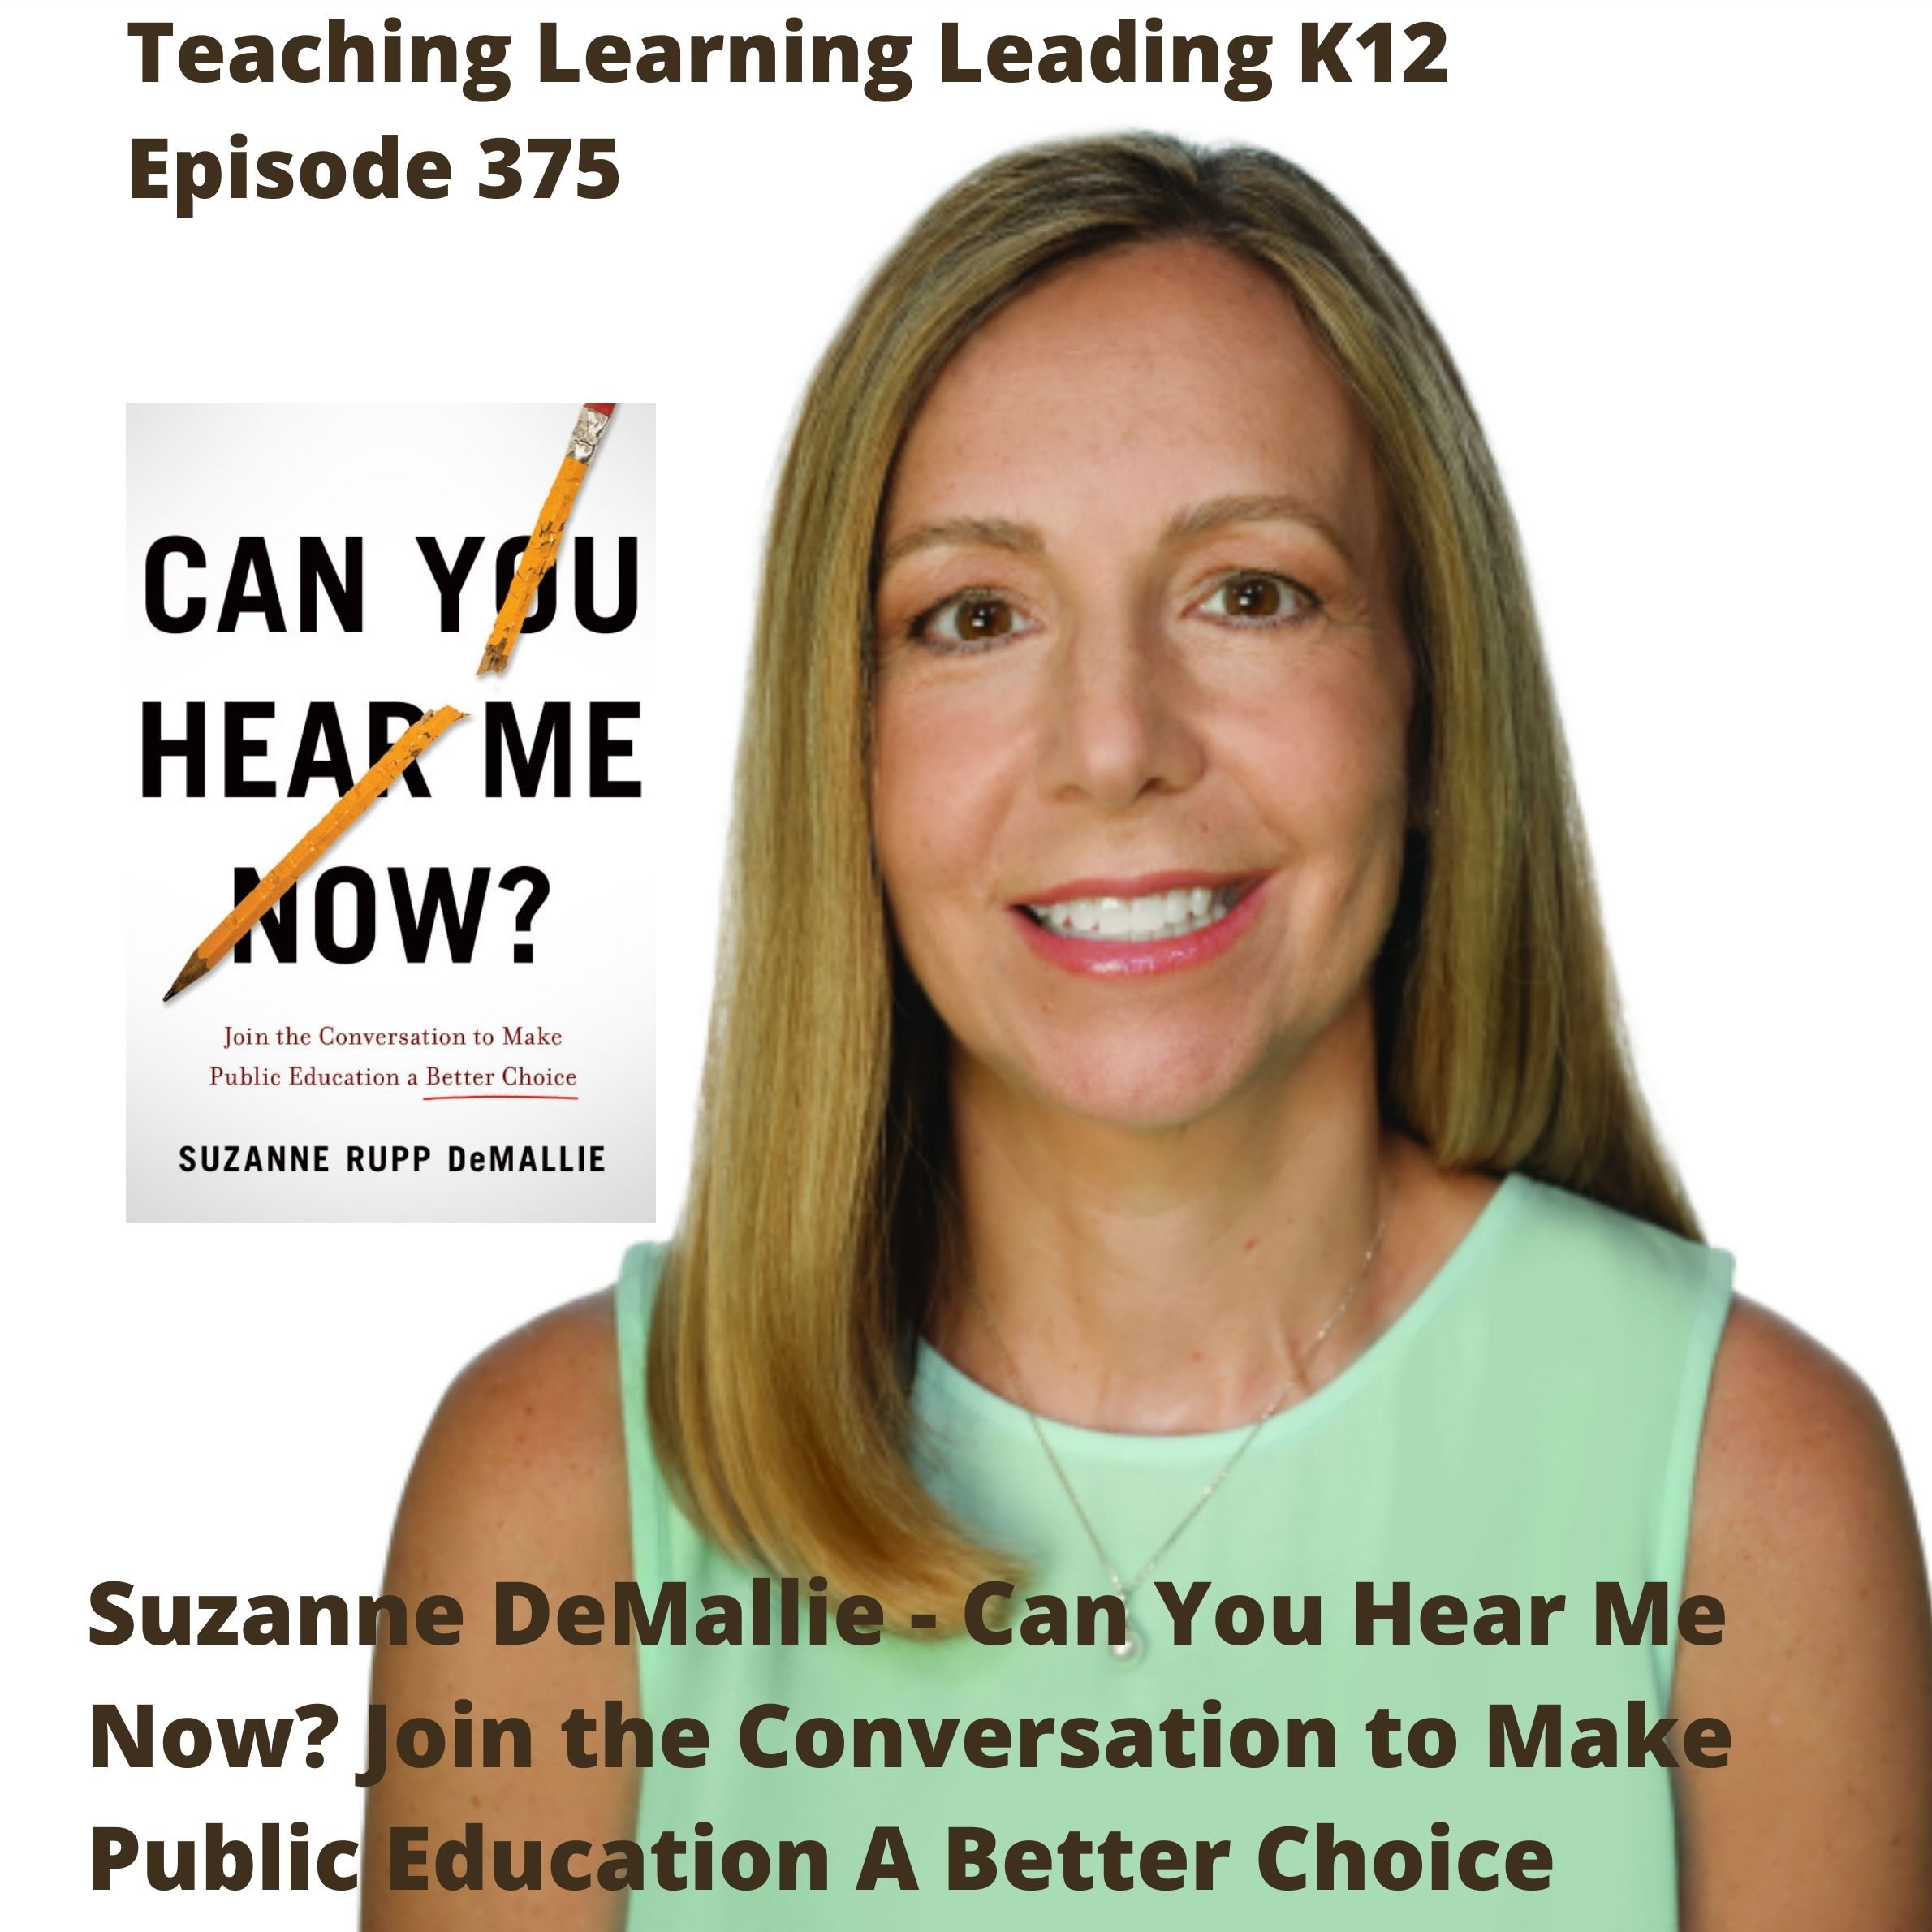 Suzanne DeMallie - Can You Hear Me Now? : Join the Conversation to Make Public Education A Better Choice - 375 Image